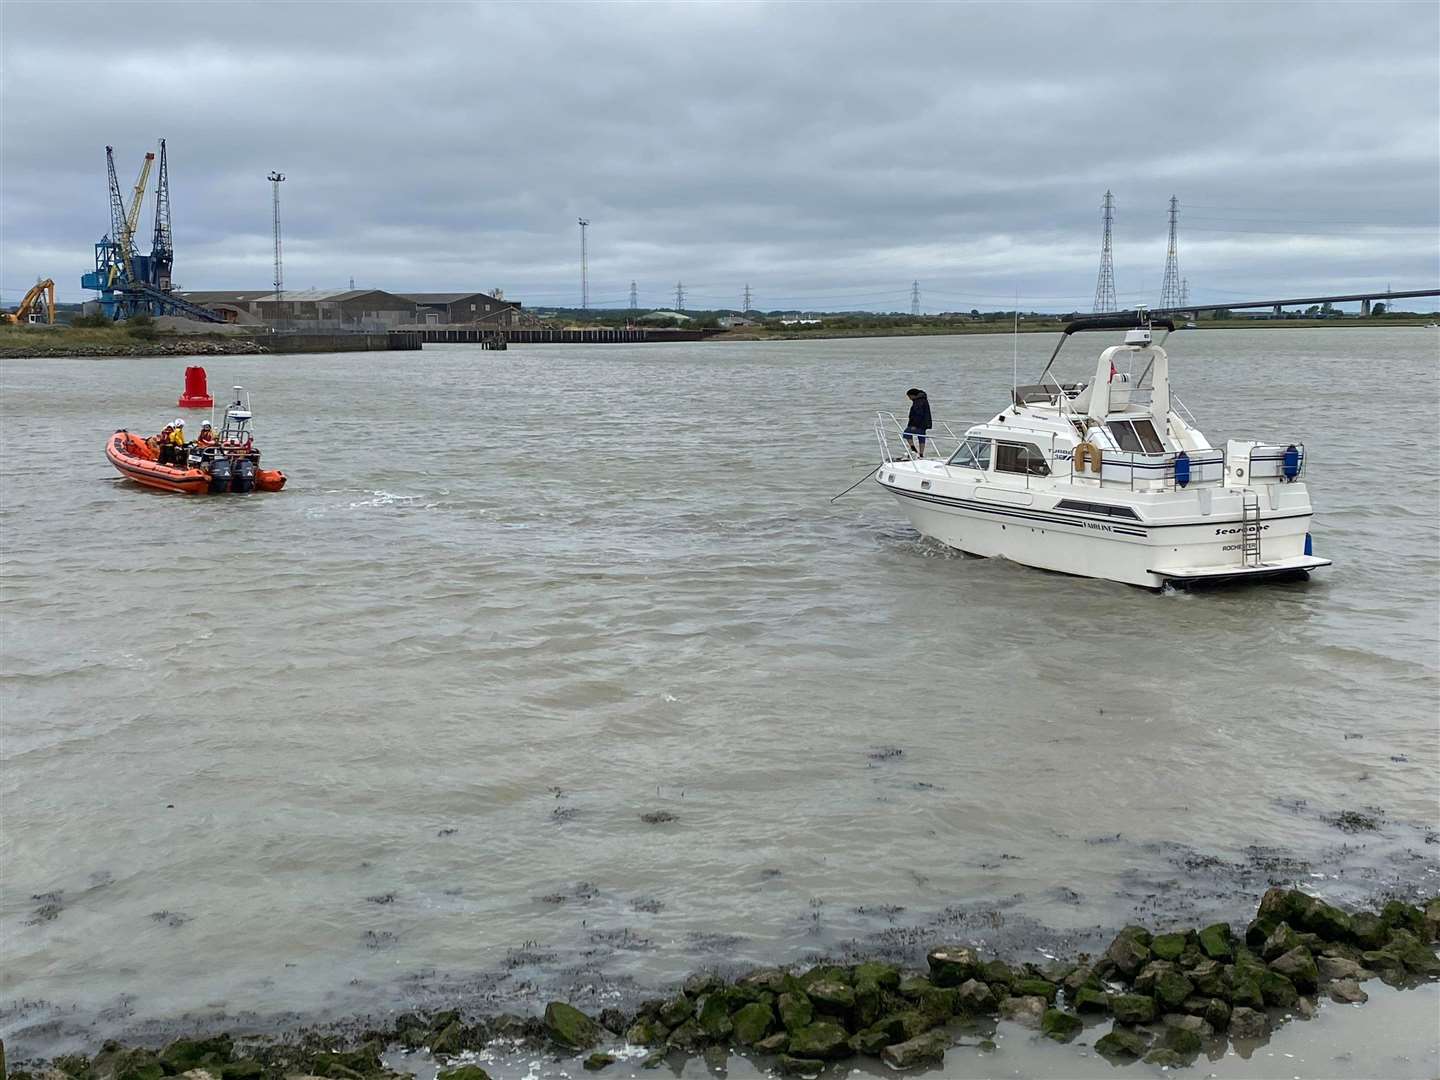 Whitstable lifeboat tows the stricken cabin cruiser back into open water near the Kingsferry Bridge on Sheppey on Saturday morning. Picture: James Crane/Sheppey Coastguard